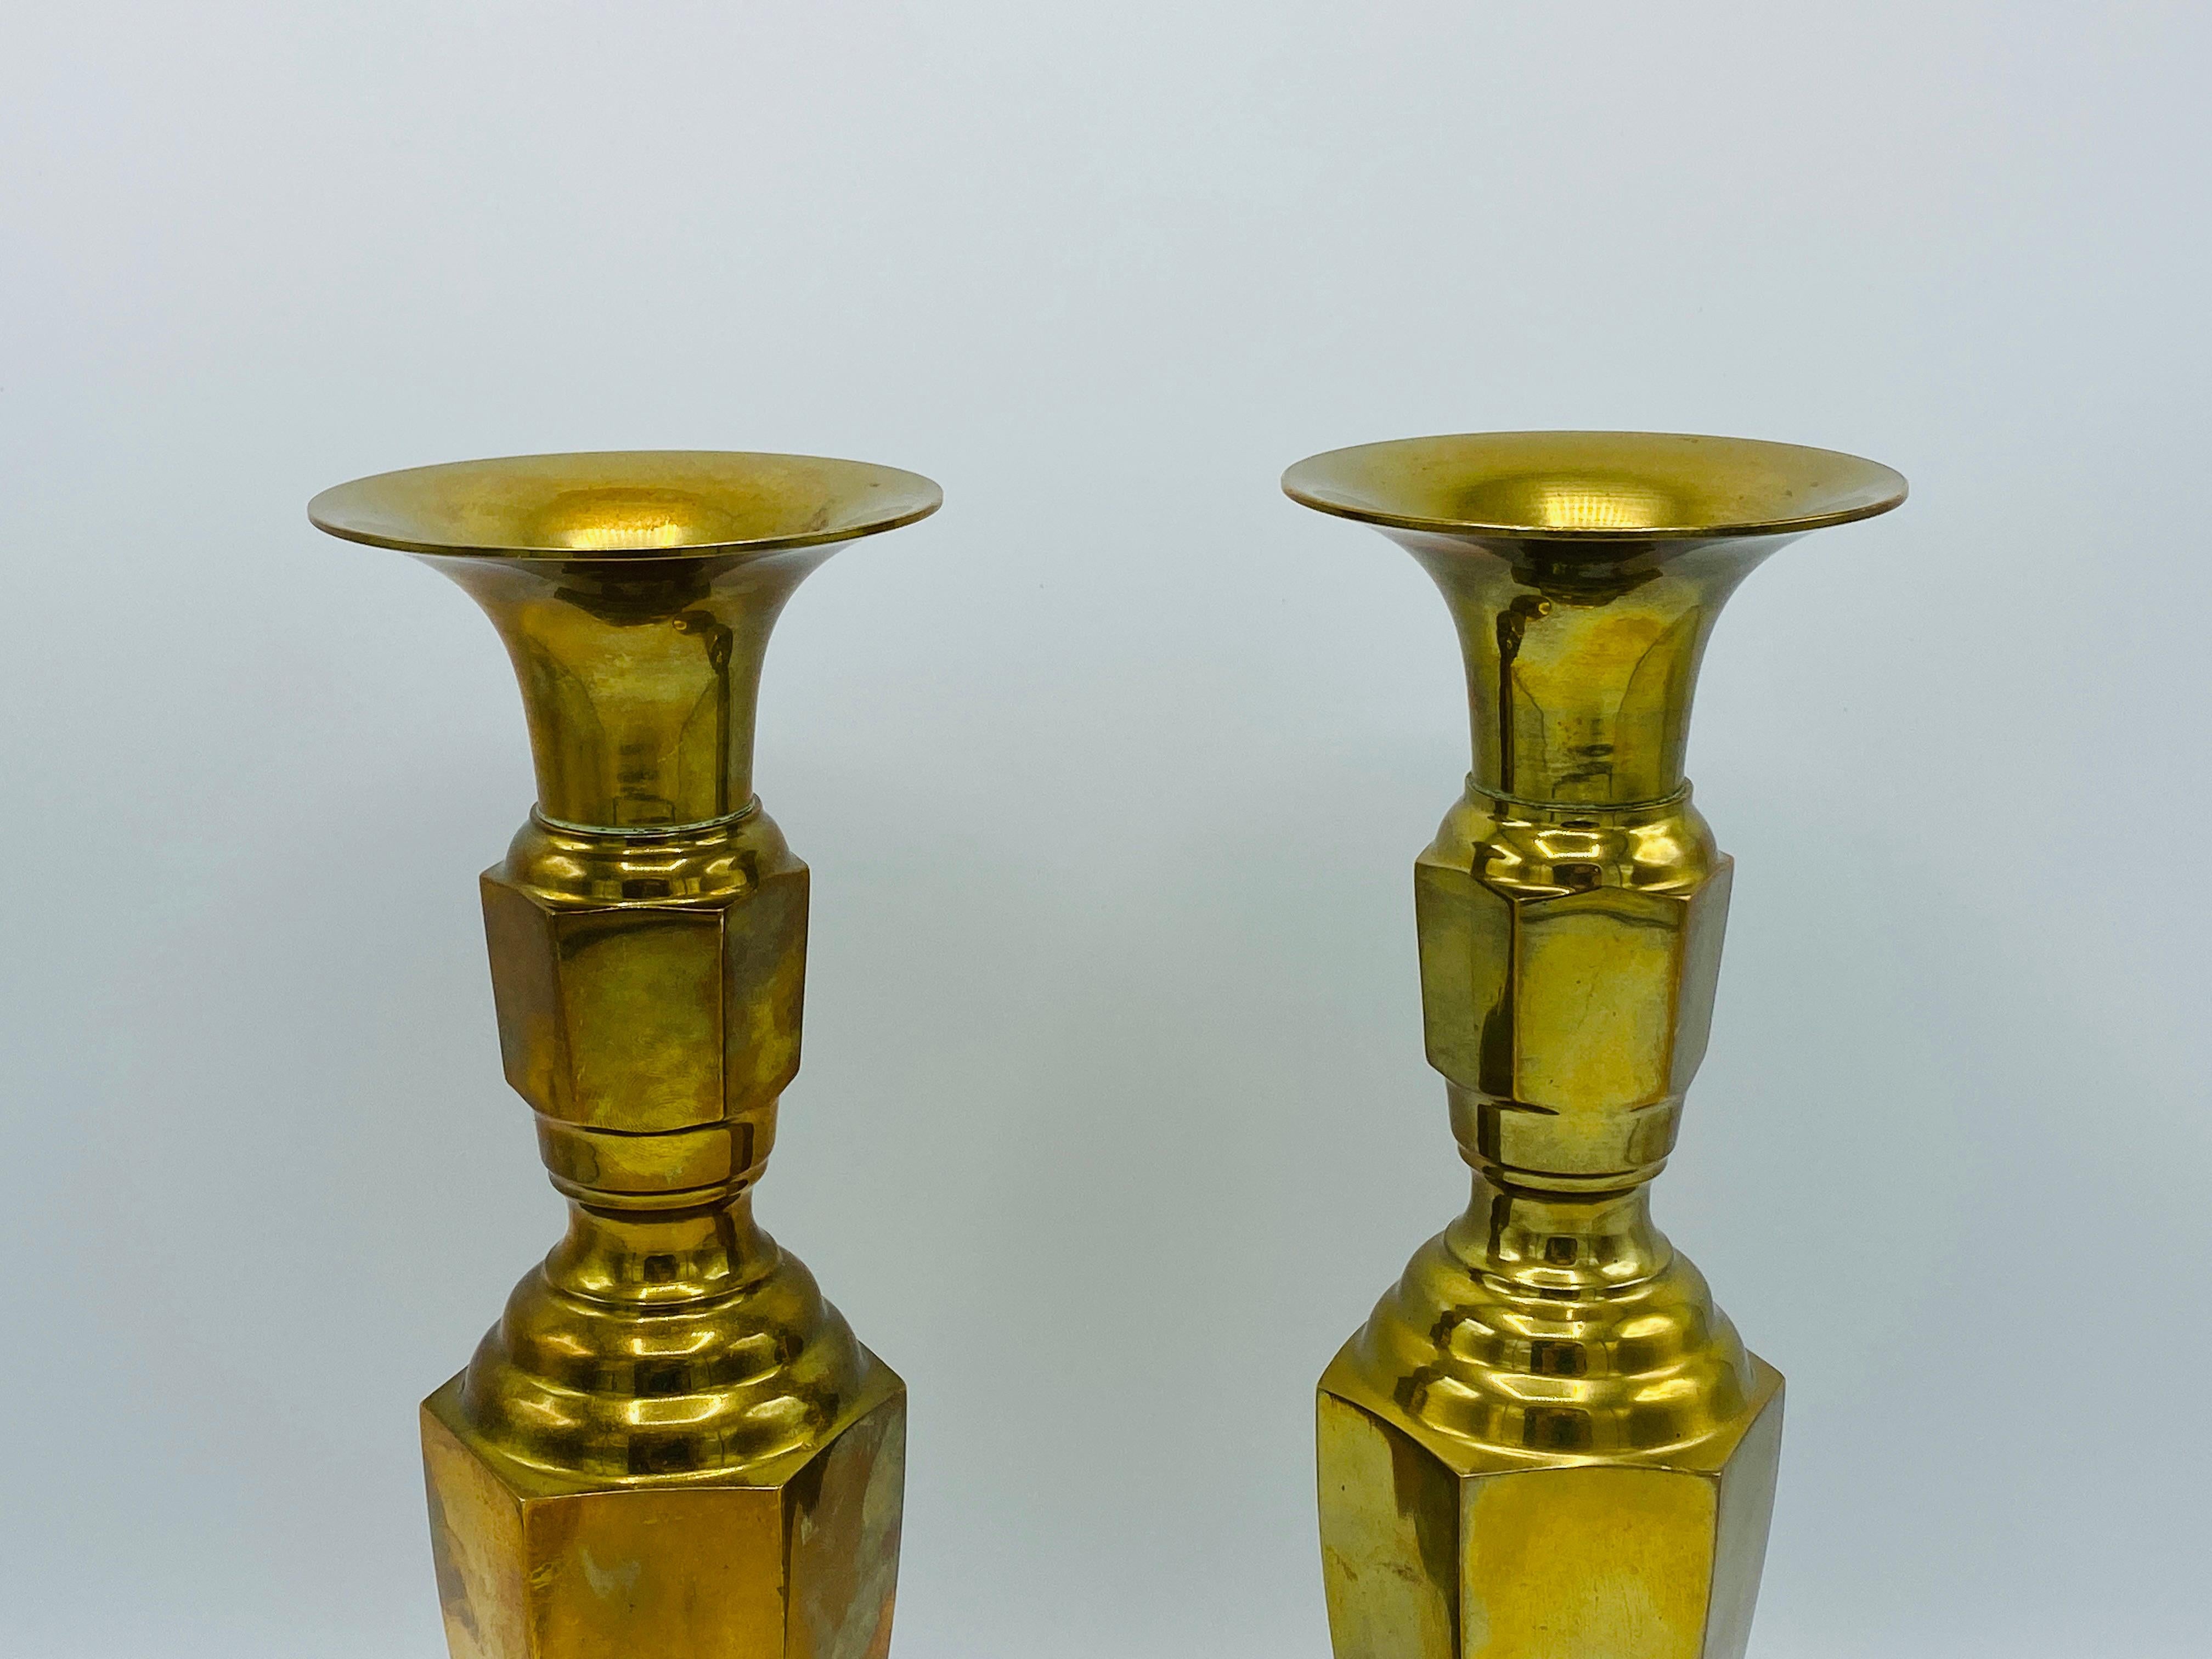 Listed is a fabulous, pair of 1960s Italian brass candlesticks. The pair stand 11.88